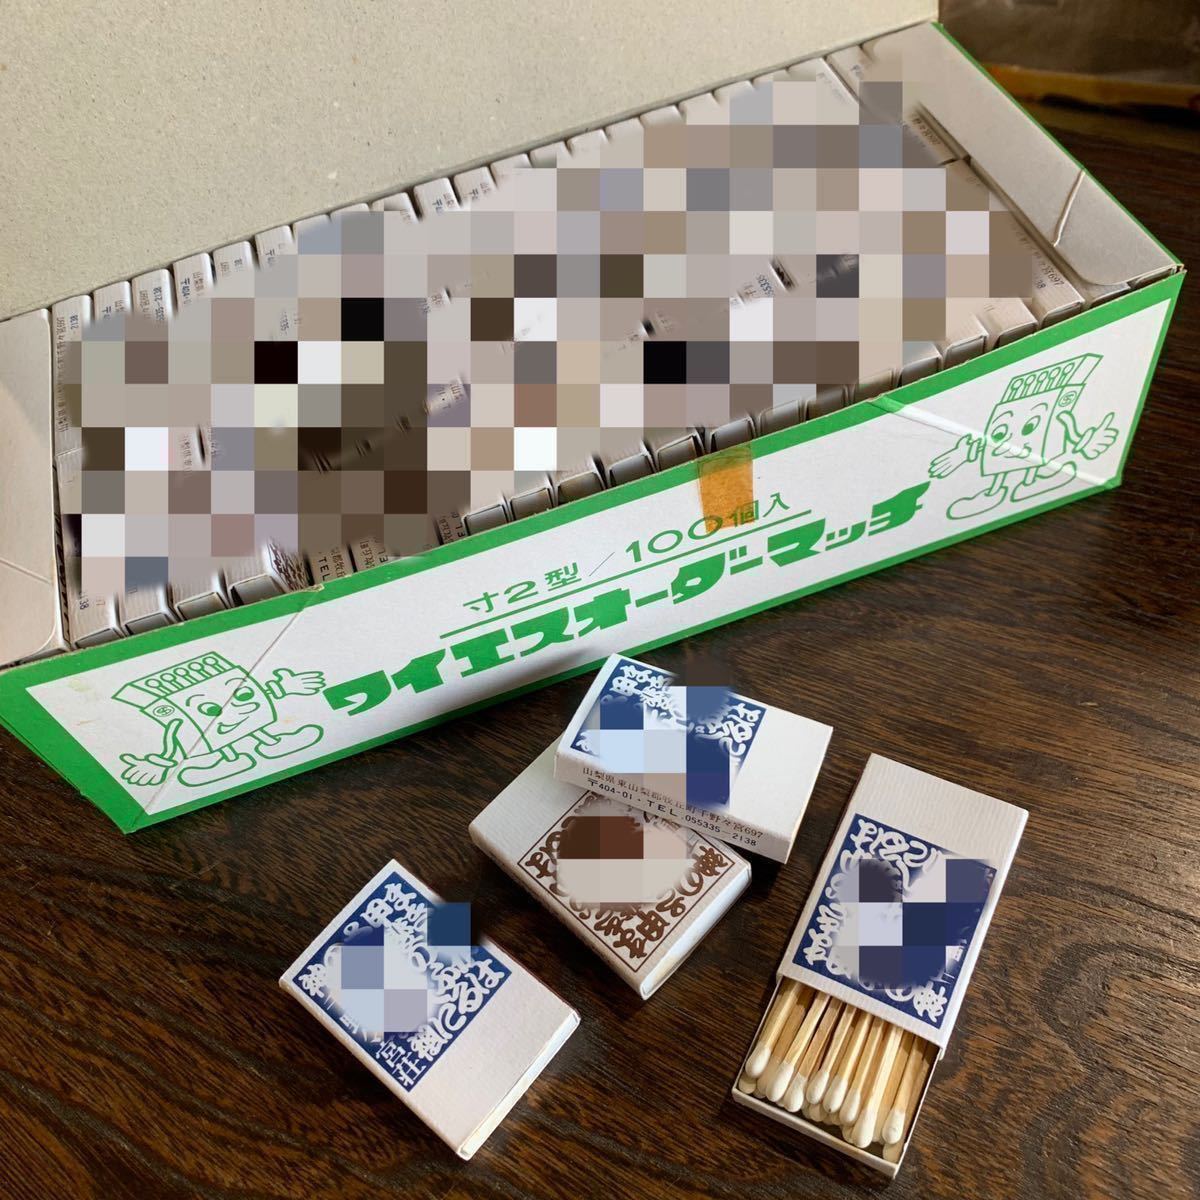 [23040201HT] Showa Retro / Match / long-term keeping goods / one box 100 piece insertion. box,25 boxed. large box 1 box / unused goods / long-term storage middle in case of. some stains, dirt equipped / present condition delivery 